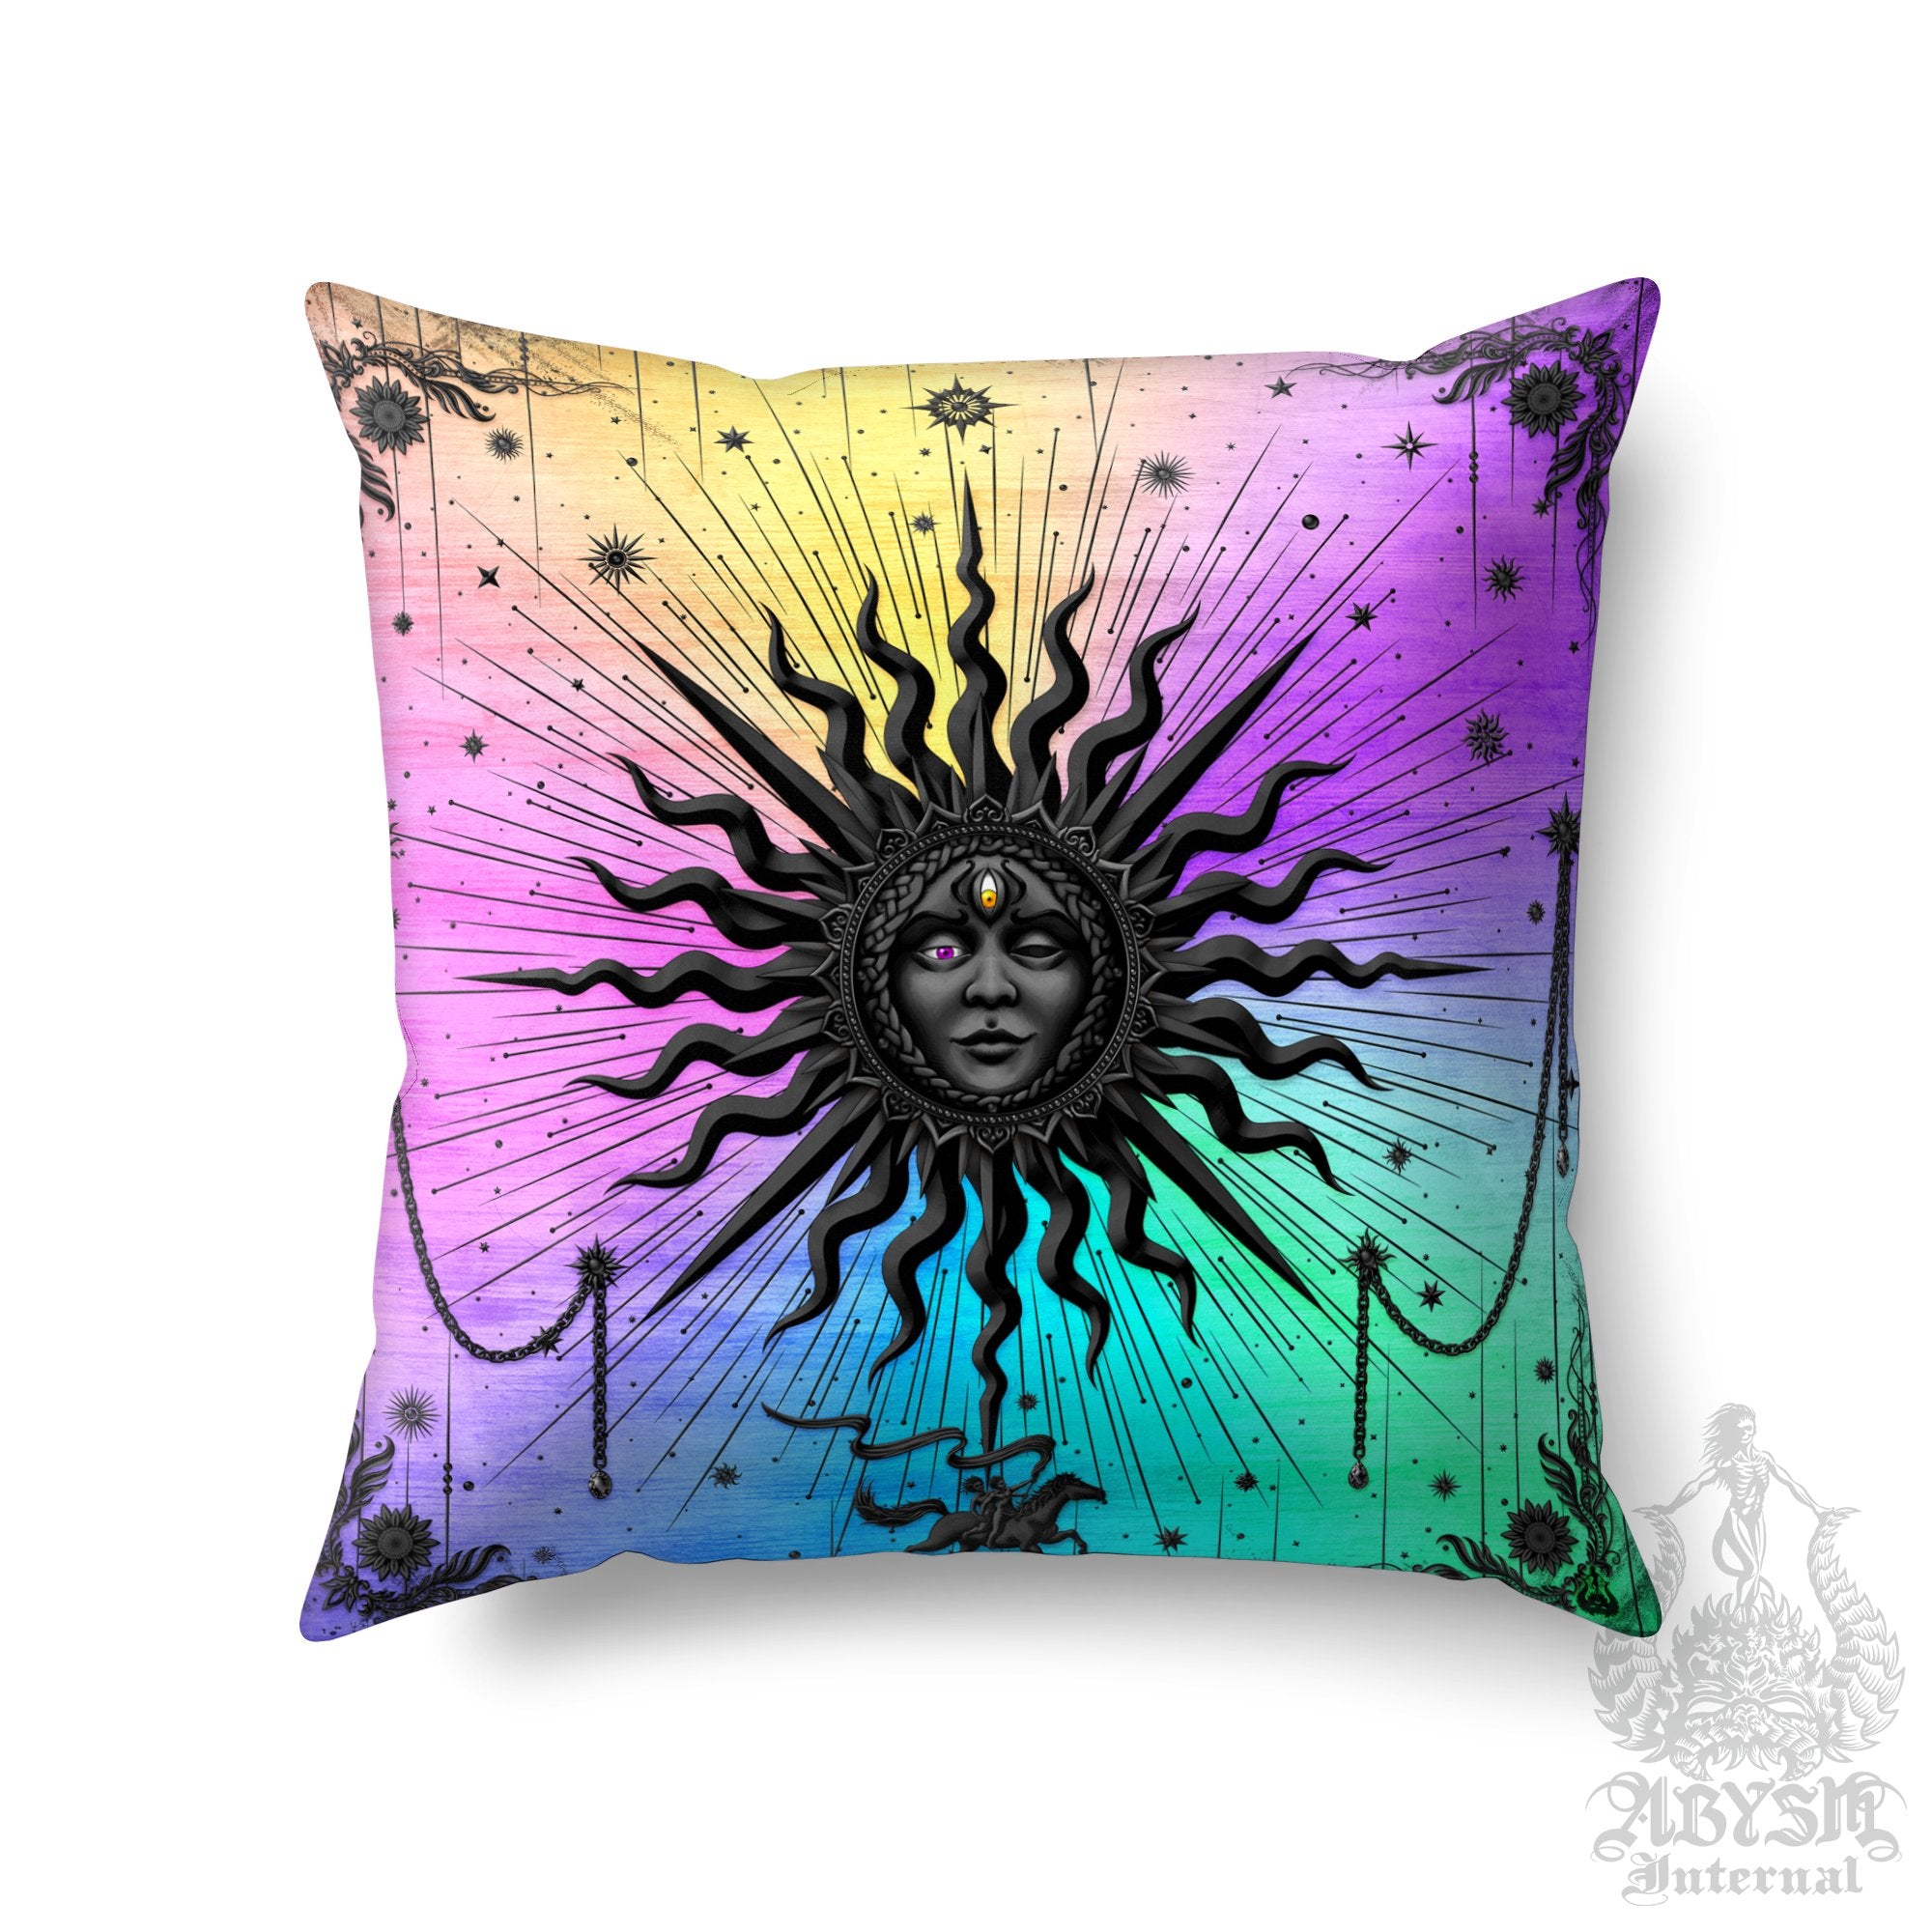 Psychedelic Throw Pillow, Trippy Decorative Accent Pillow, Indie Square Cushion Cover, Arcana Sun Tarot Art, Boho Home, Magic & Fortune Room Decor - Pastel Black - Abysm Internal